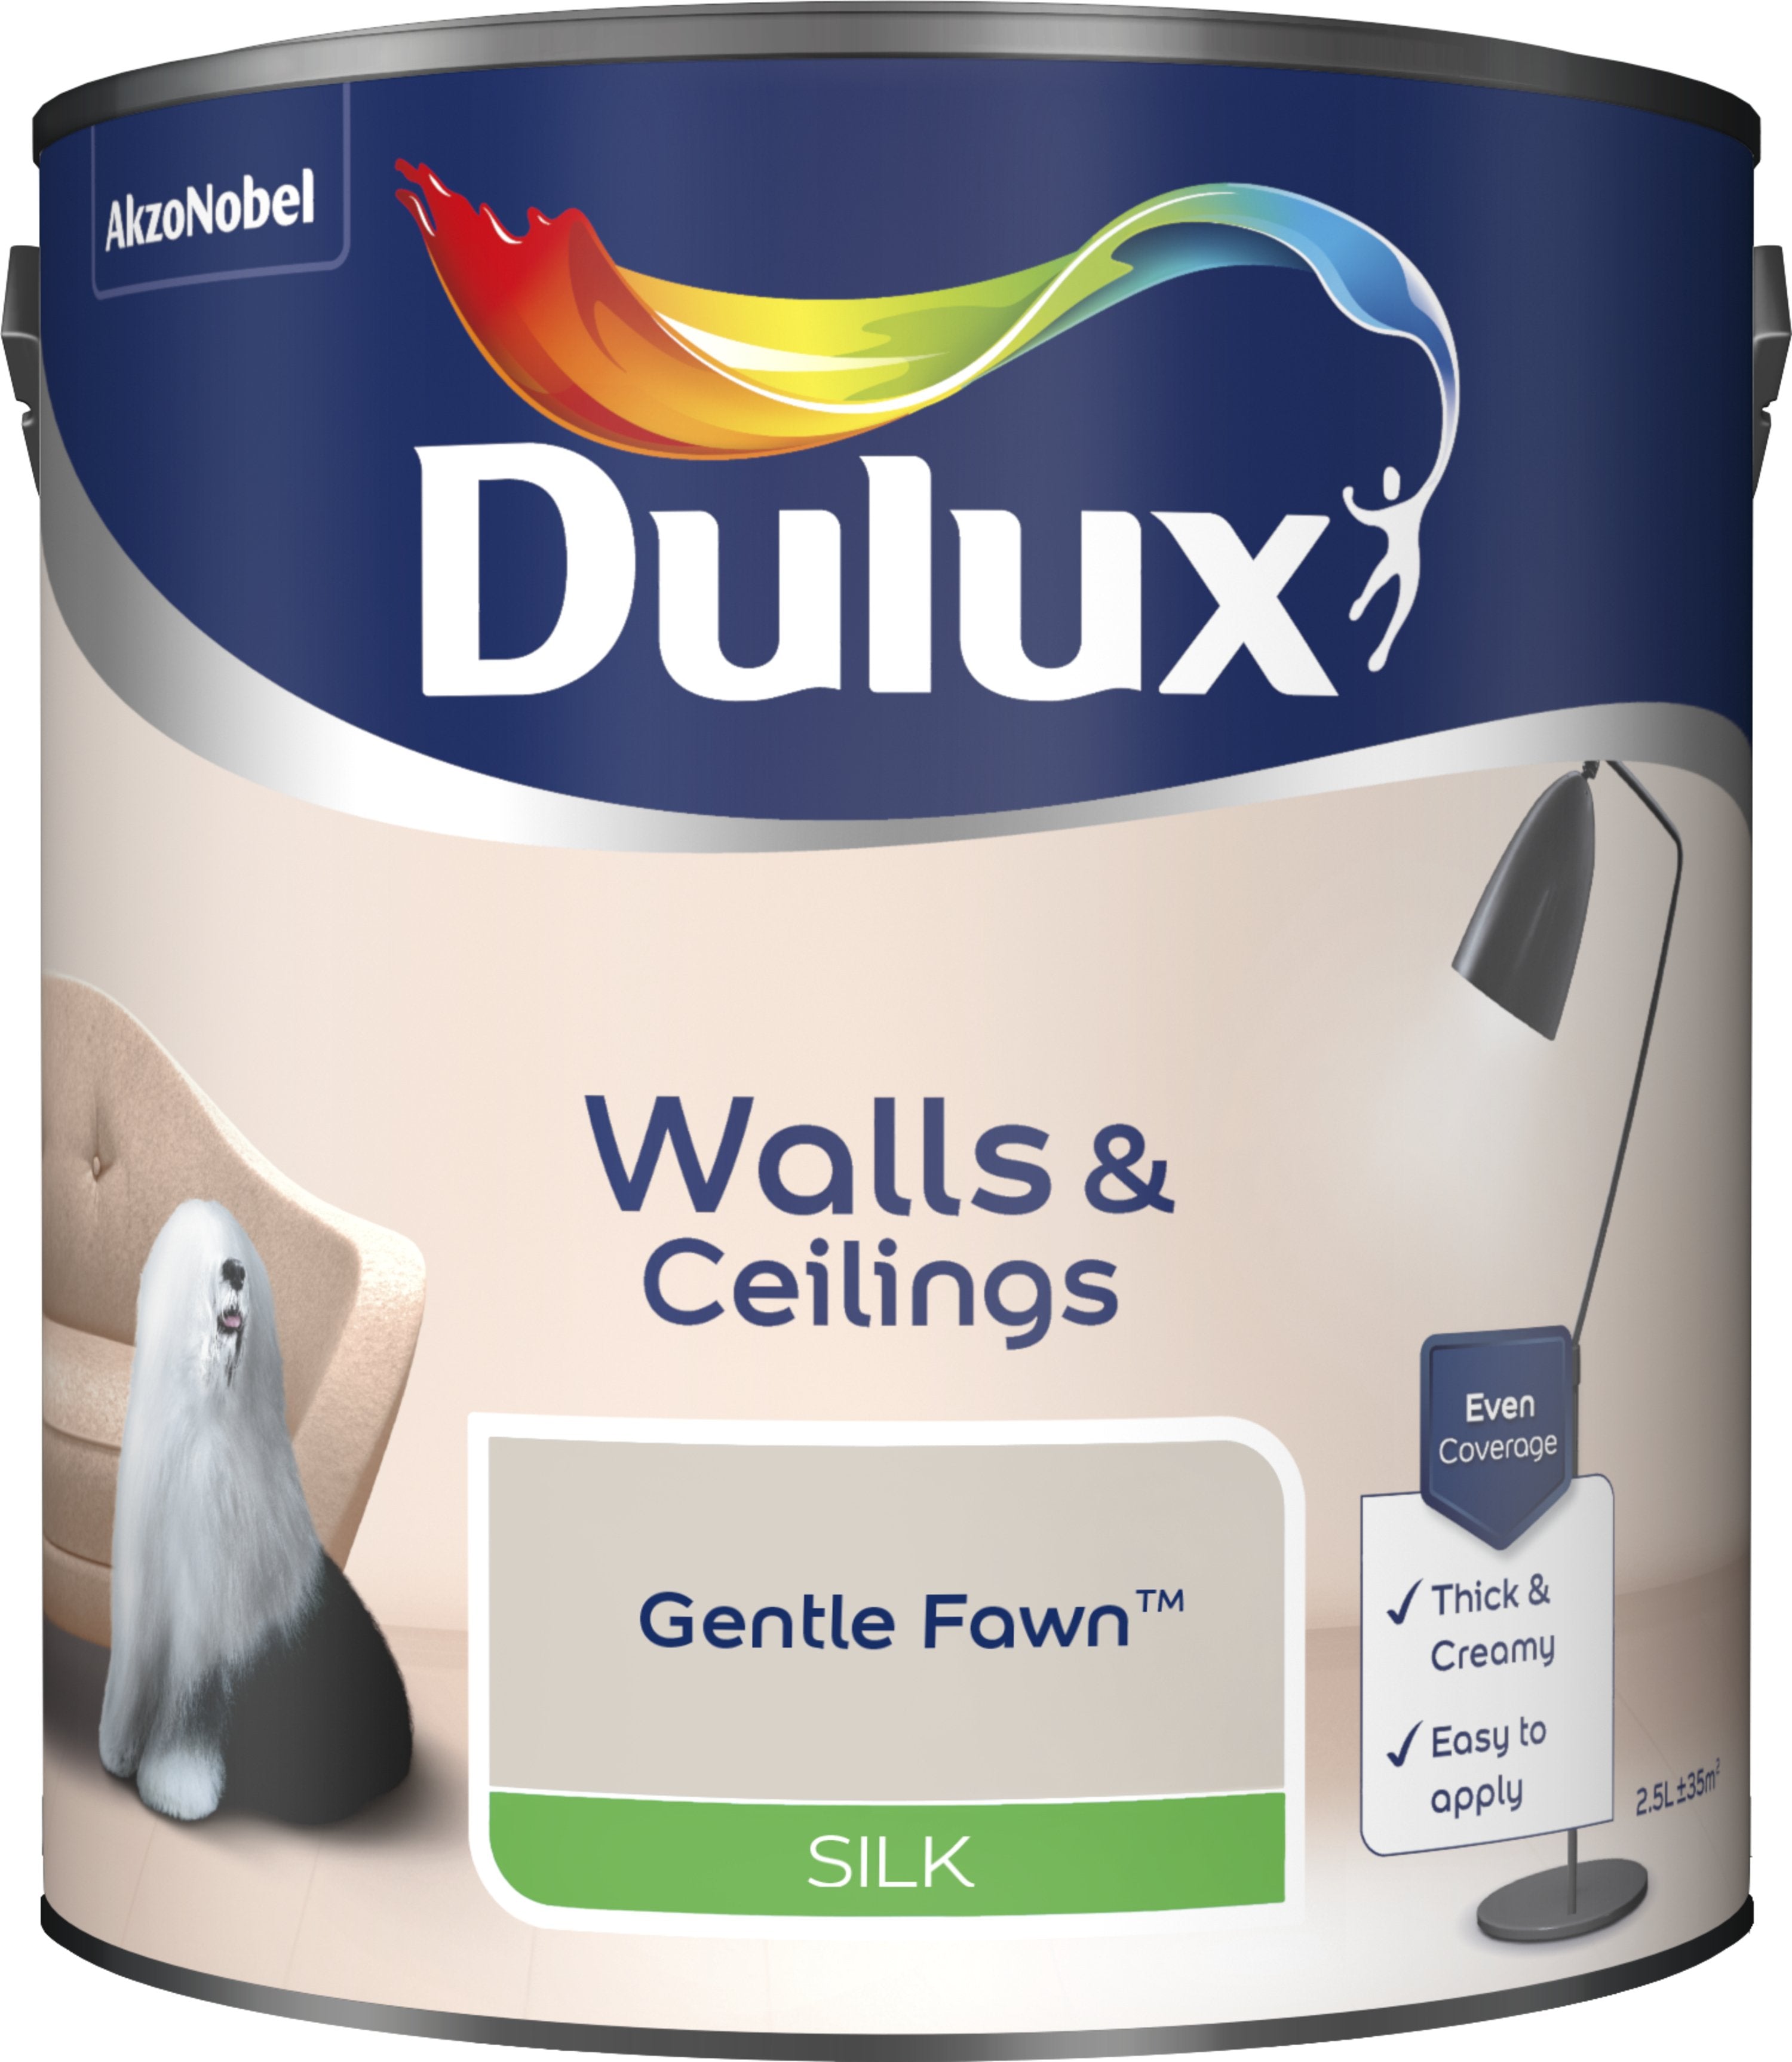 Dulux Silk Emulsion Paint For Walls And Ceilings - Gentle Fawn 2.5L Garden & Diy  Home Improvements